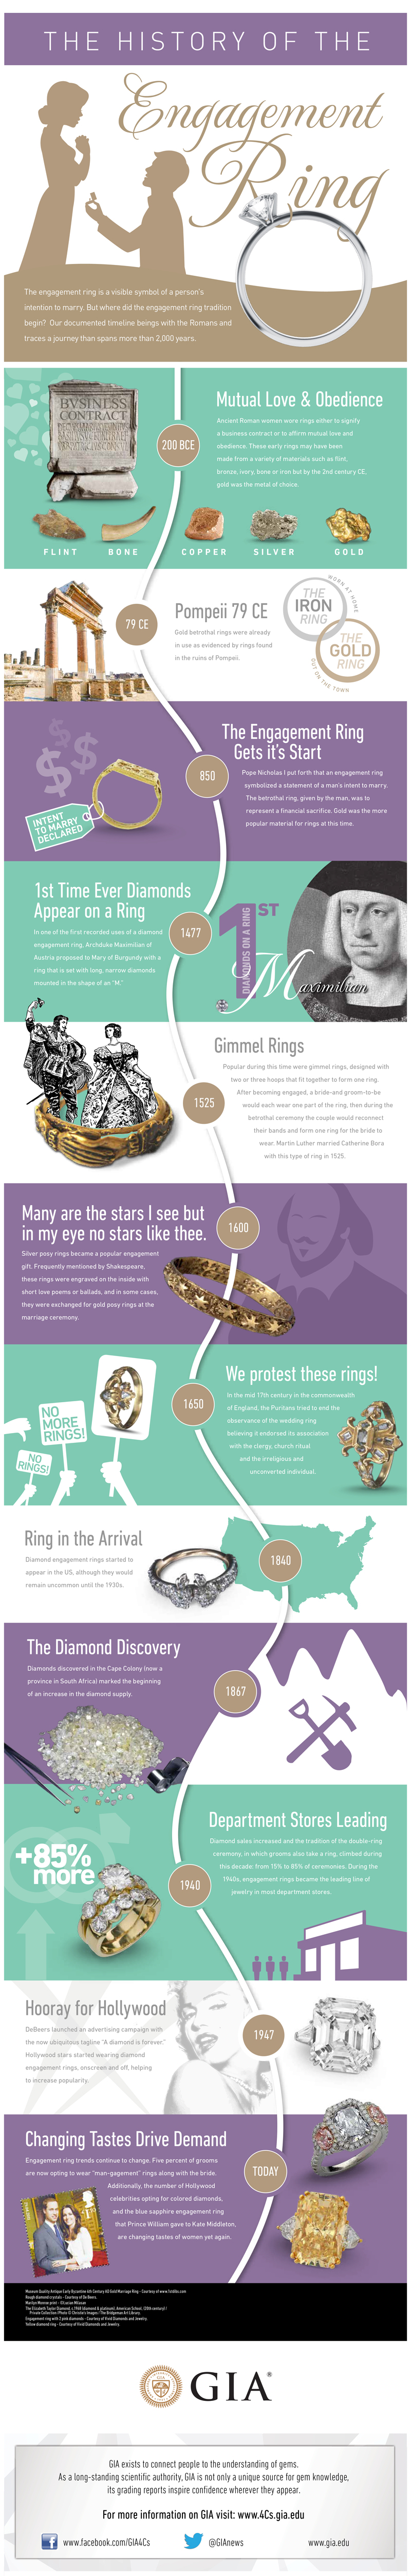 History of Engagement Rings